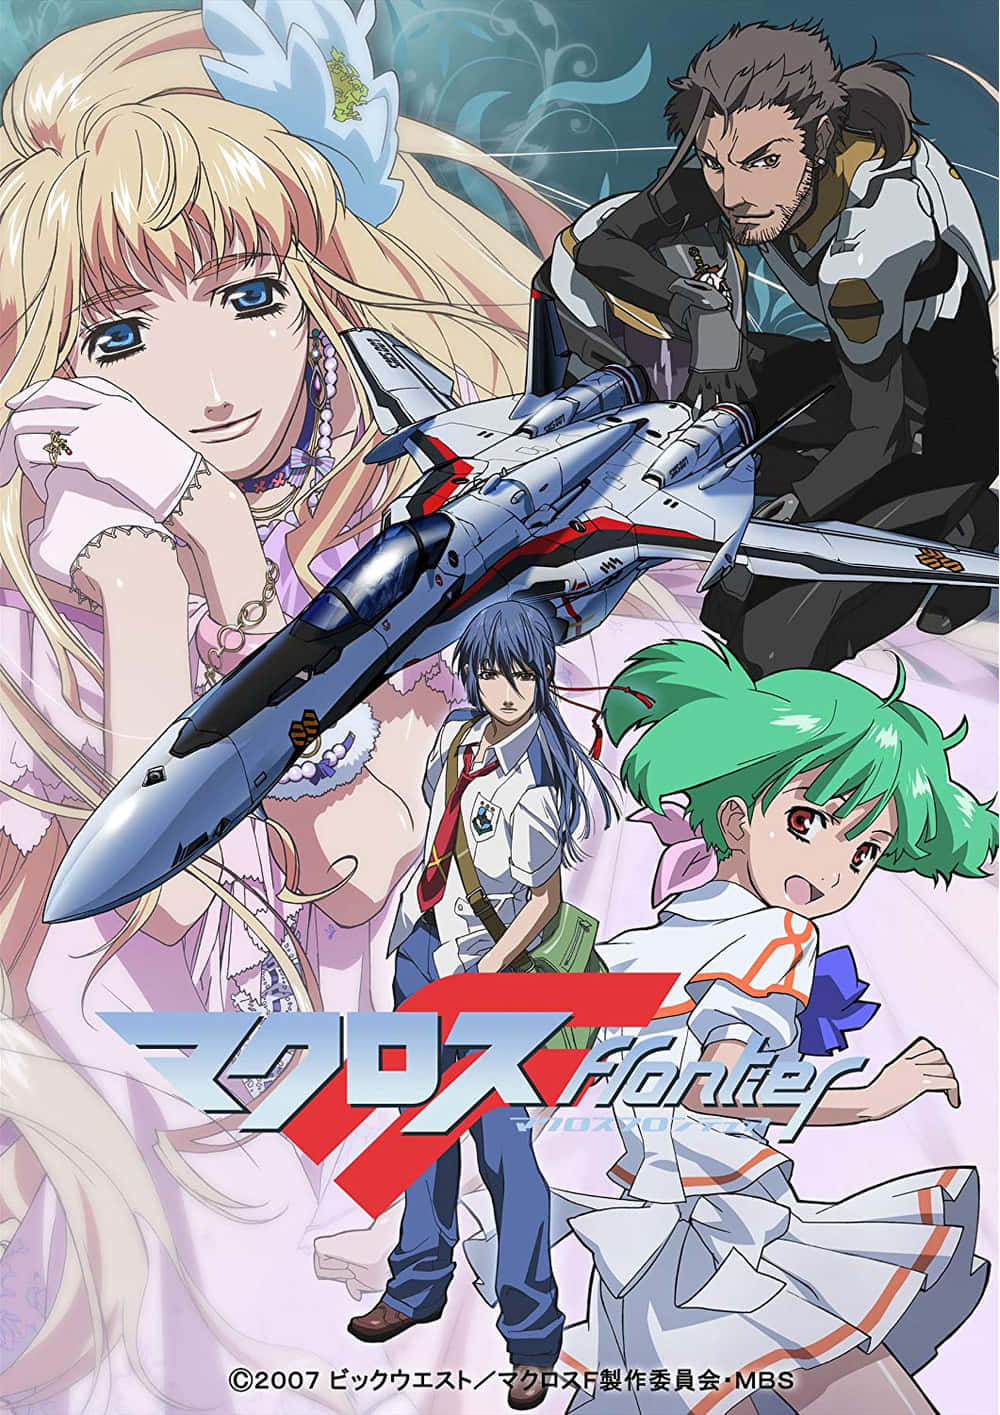 A Poster For The Anime Series, Featuring Two Characters